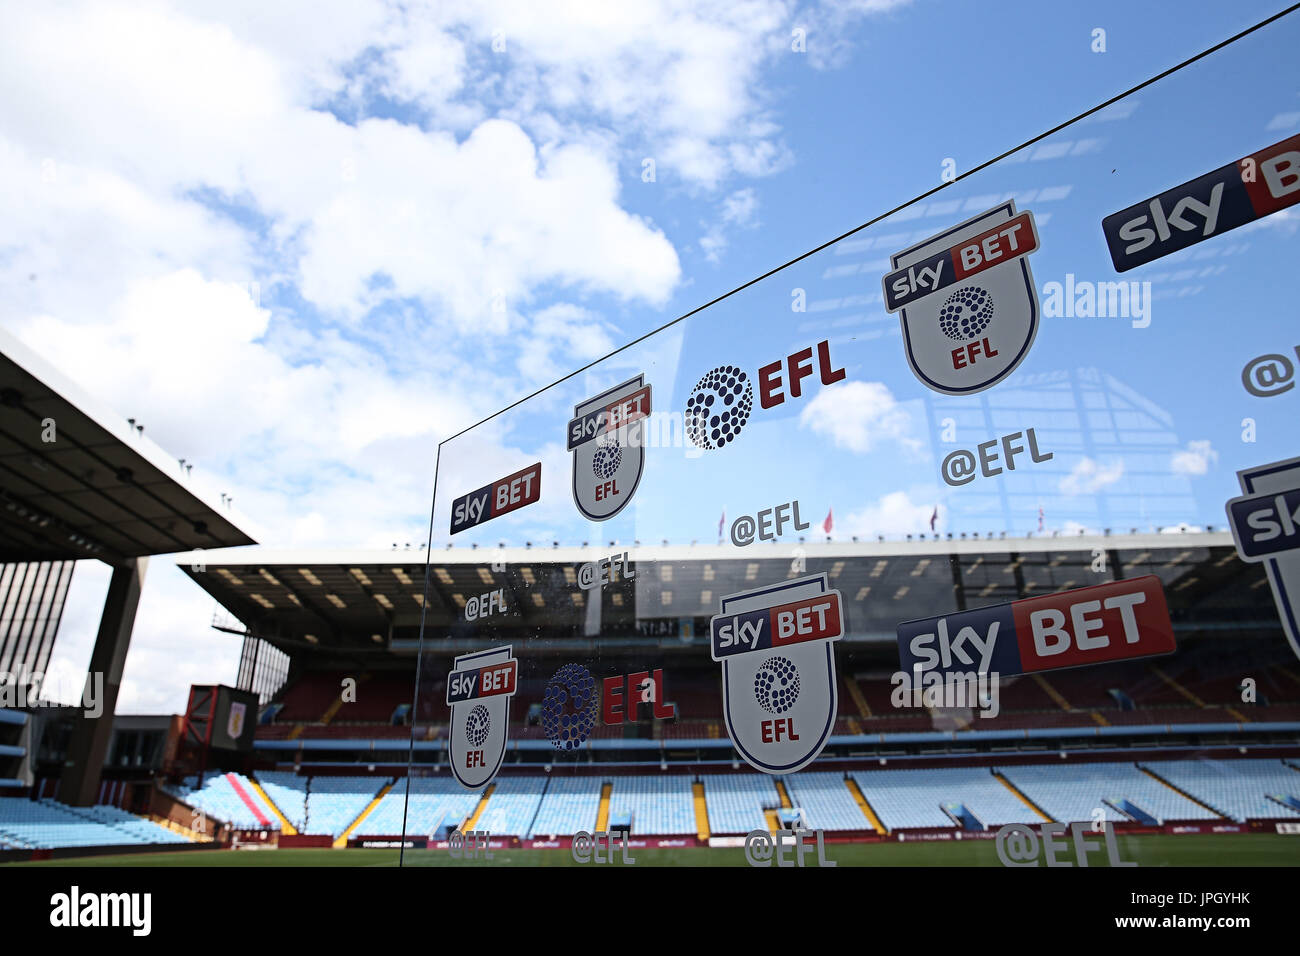 EFL branding board during the EFL 2017/18 pre-season media event at Villa Park, Birmingham. PRESS ASSOCIATION Photo. Picture date: Tuesday August 1, 2017. See PA story SOCCER EFL. Photo credit should read: Barrington Coombs/PA Wire. RESTRICTIONS: EDITORIAL USE ONLY No use with unauthorised audio, video, data, fixture lists, club/league logos or 'live' services. Online in-match use limited to 75 images, no video emulation. No use in betting, games or single club/league/player publications. Stock Photo